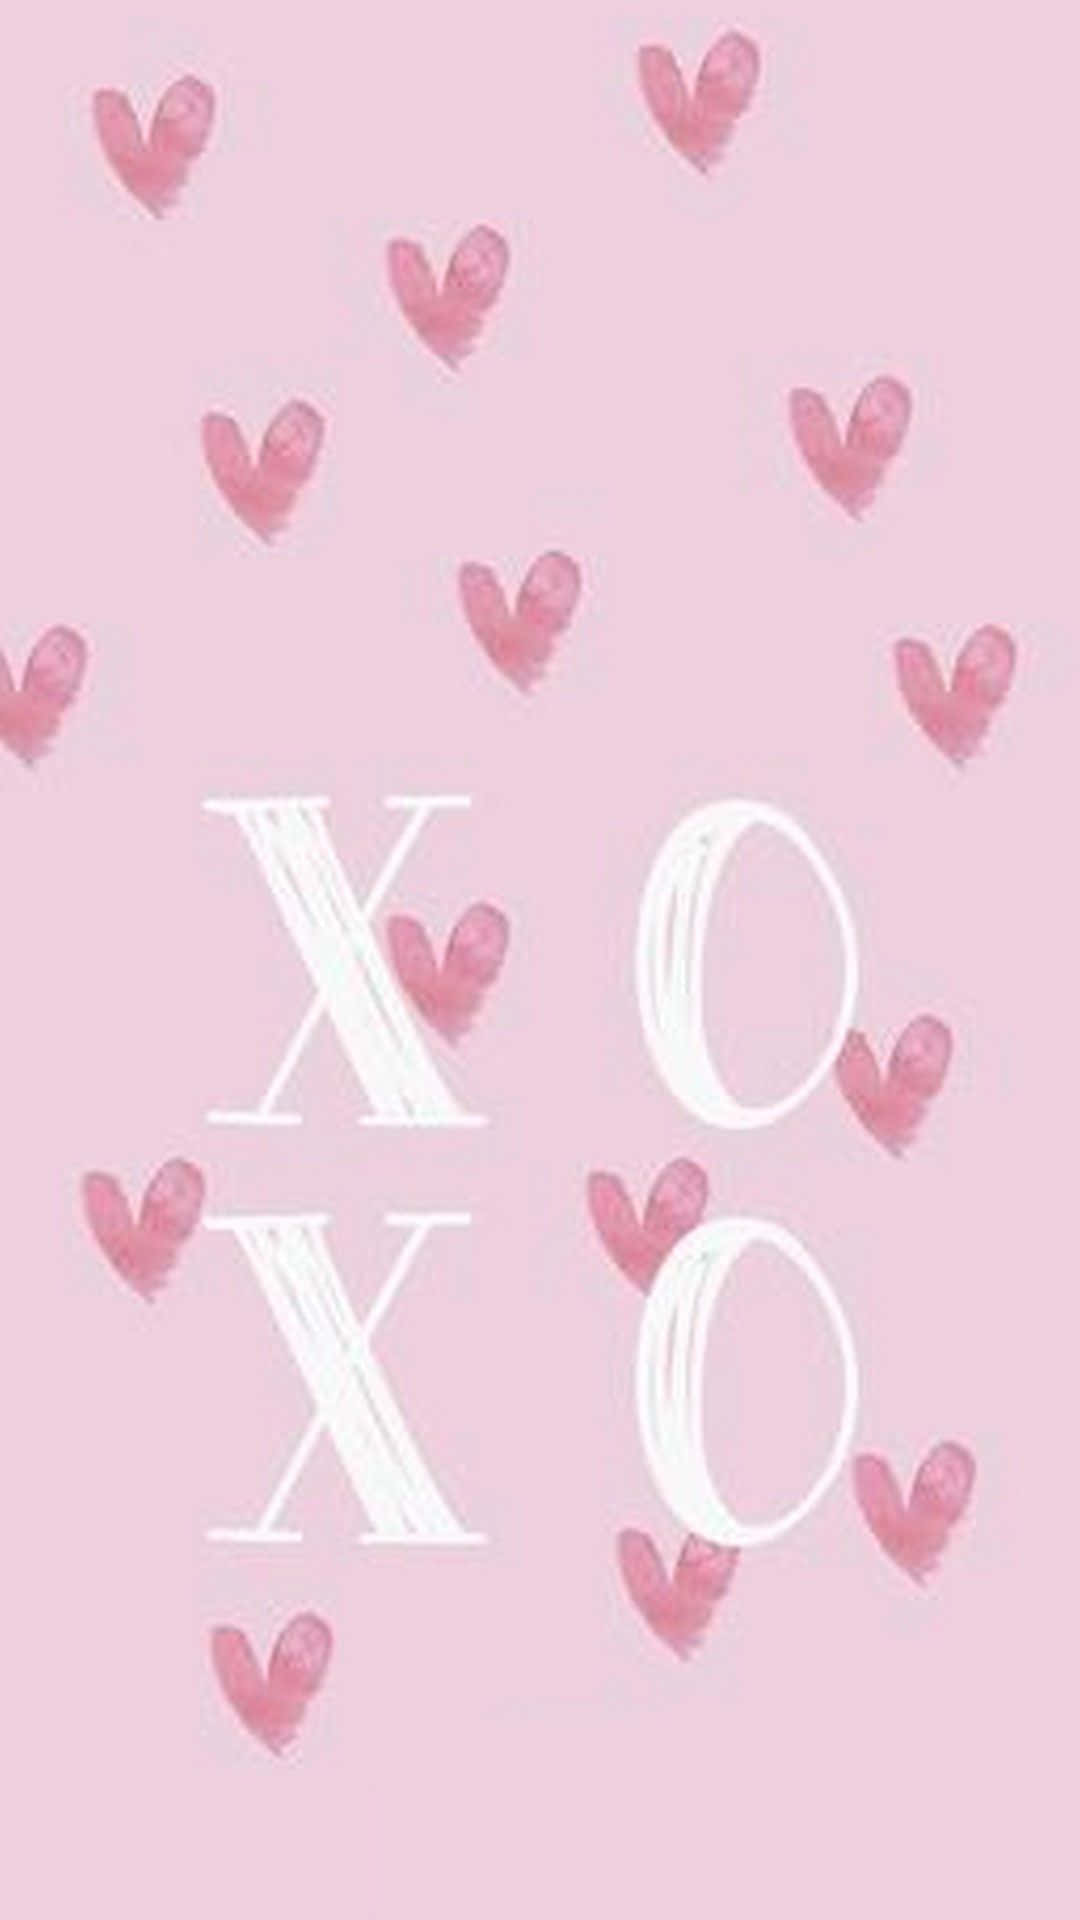 A Pink Background With Hearts And The Word Xoxo